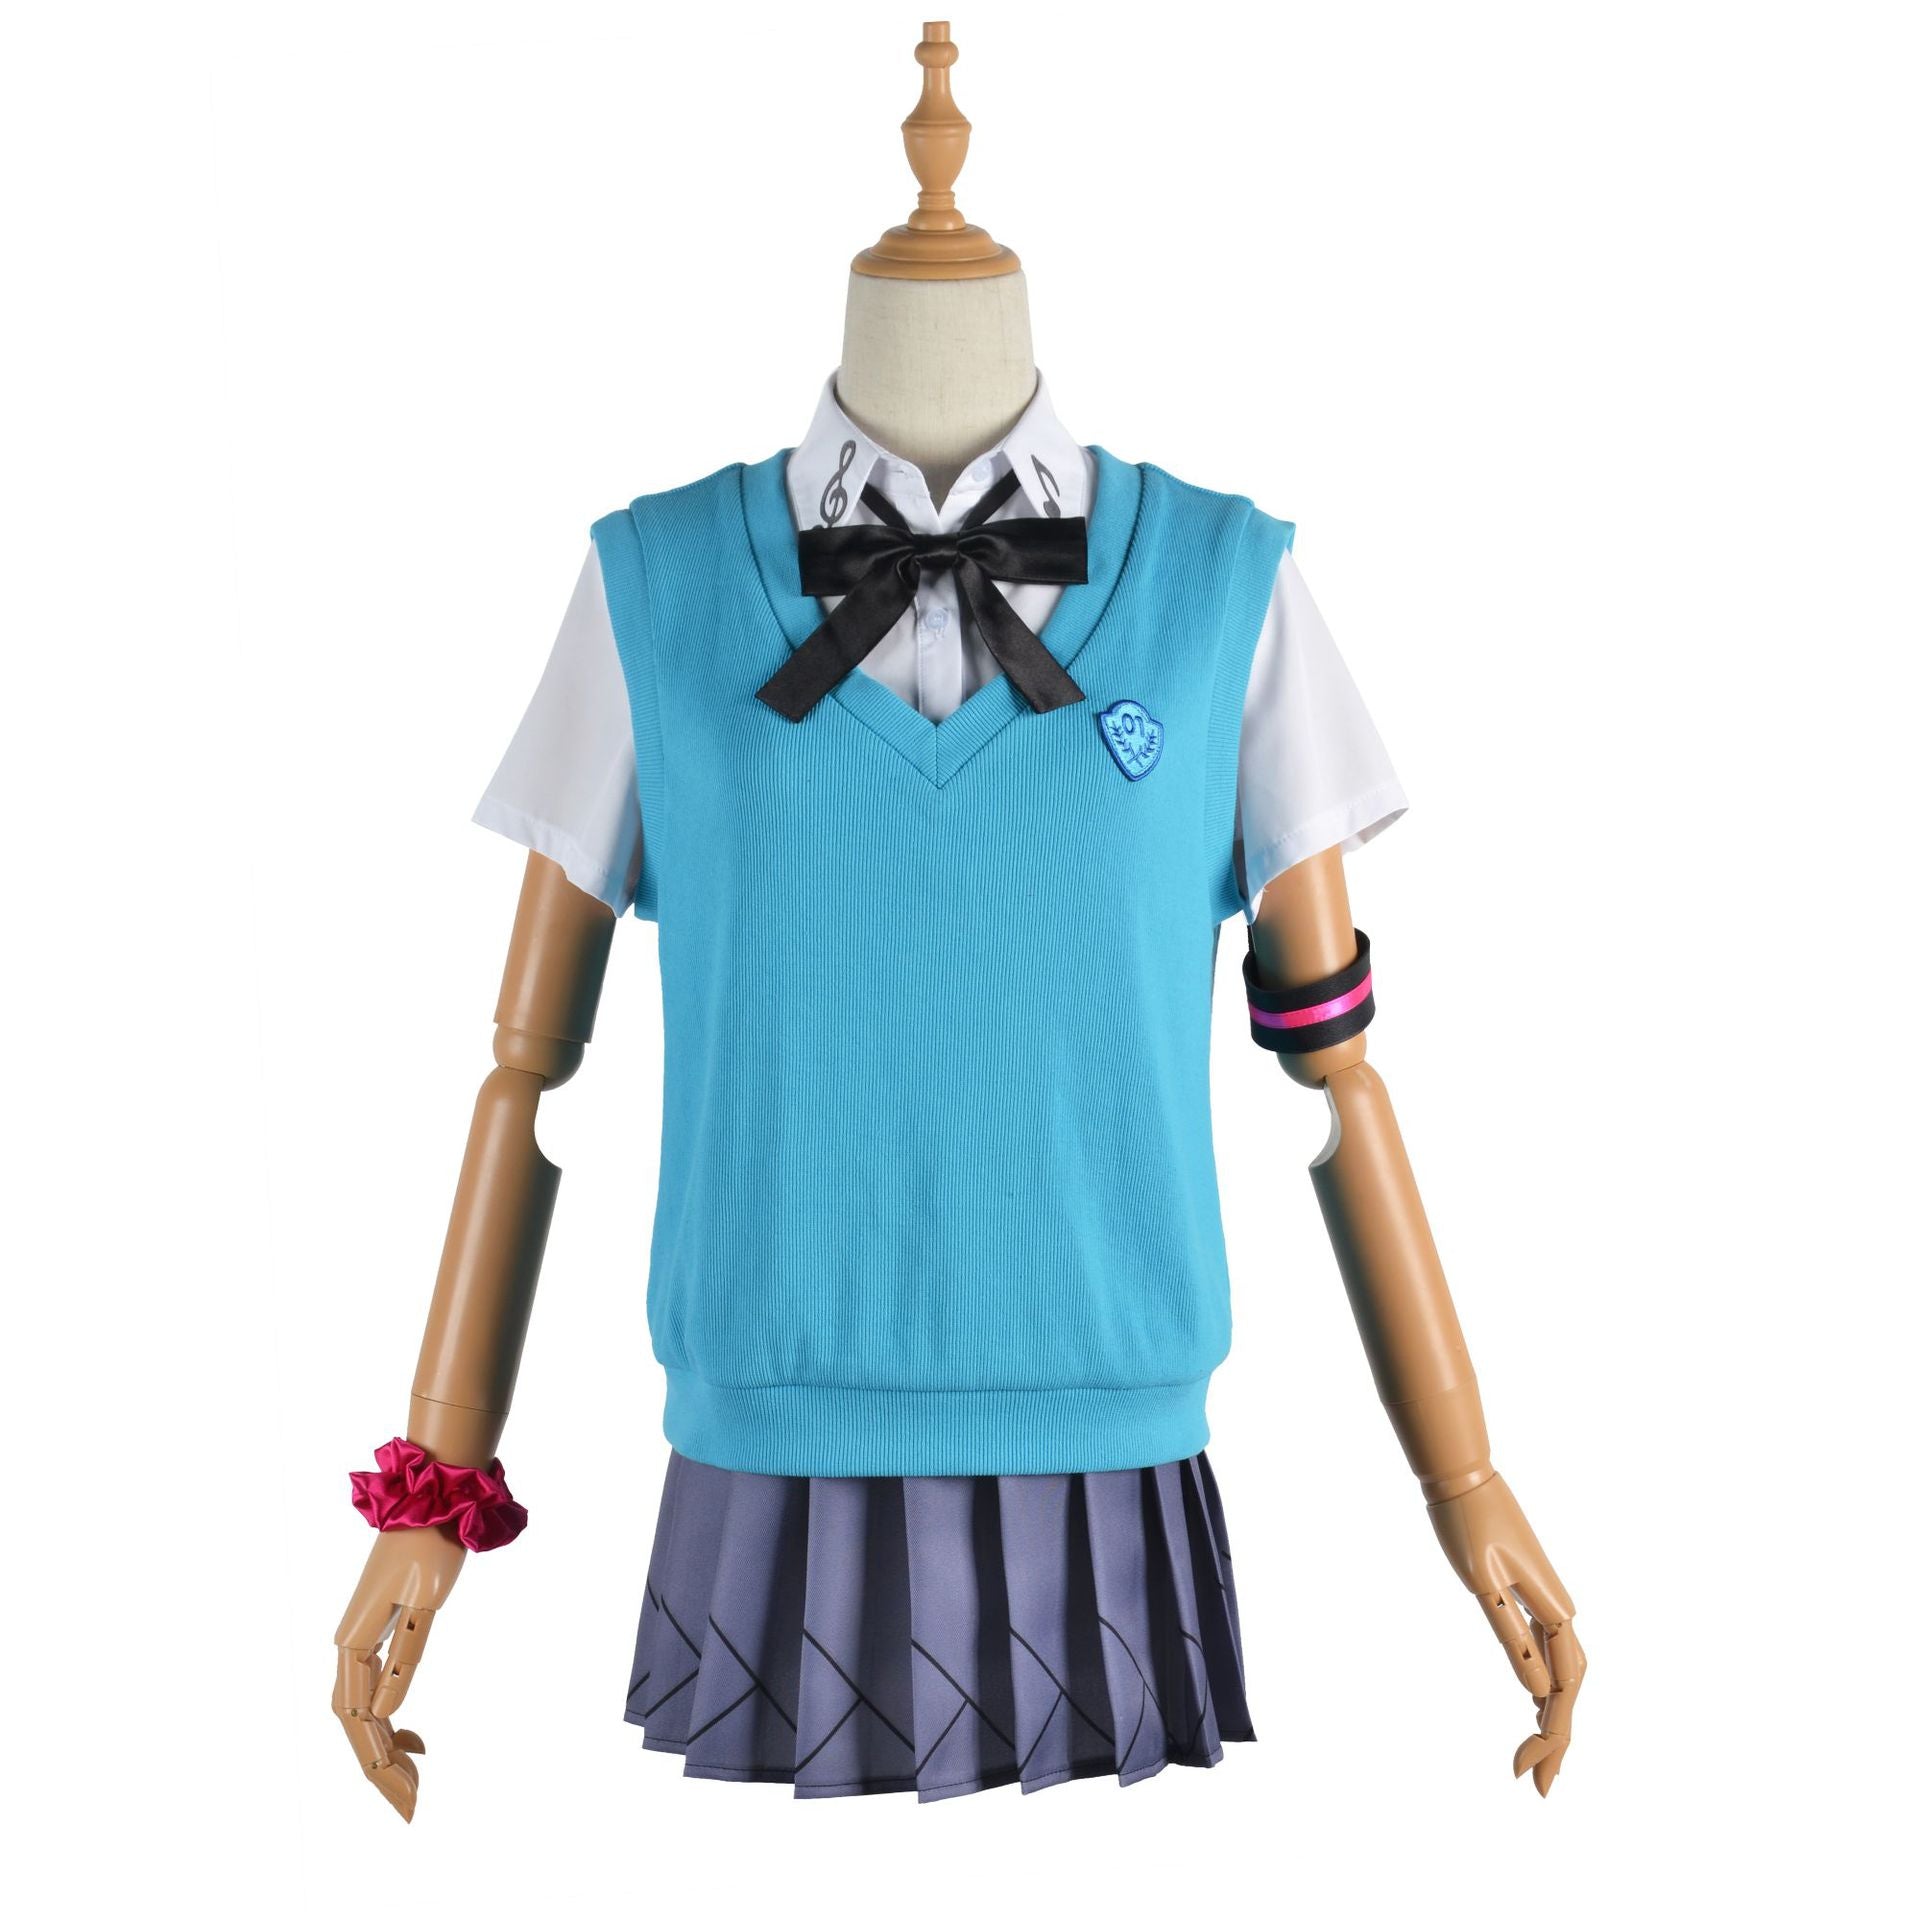 Rulercosplay Vocaloid Miku 16th Anniversary Cosplay Costume